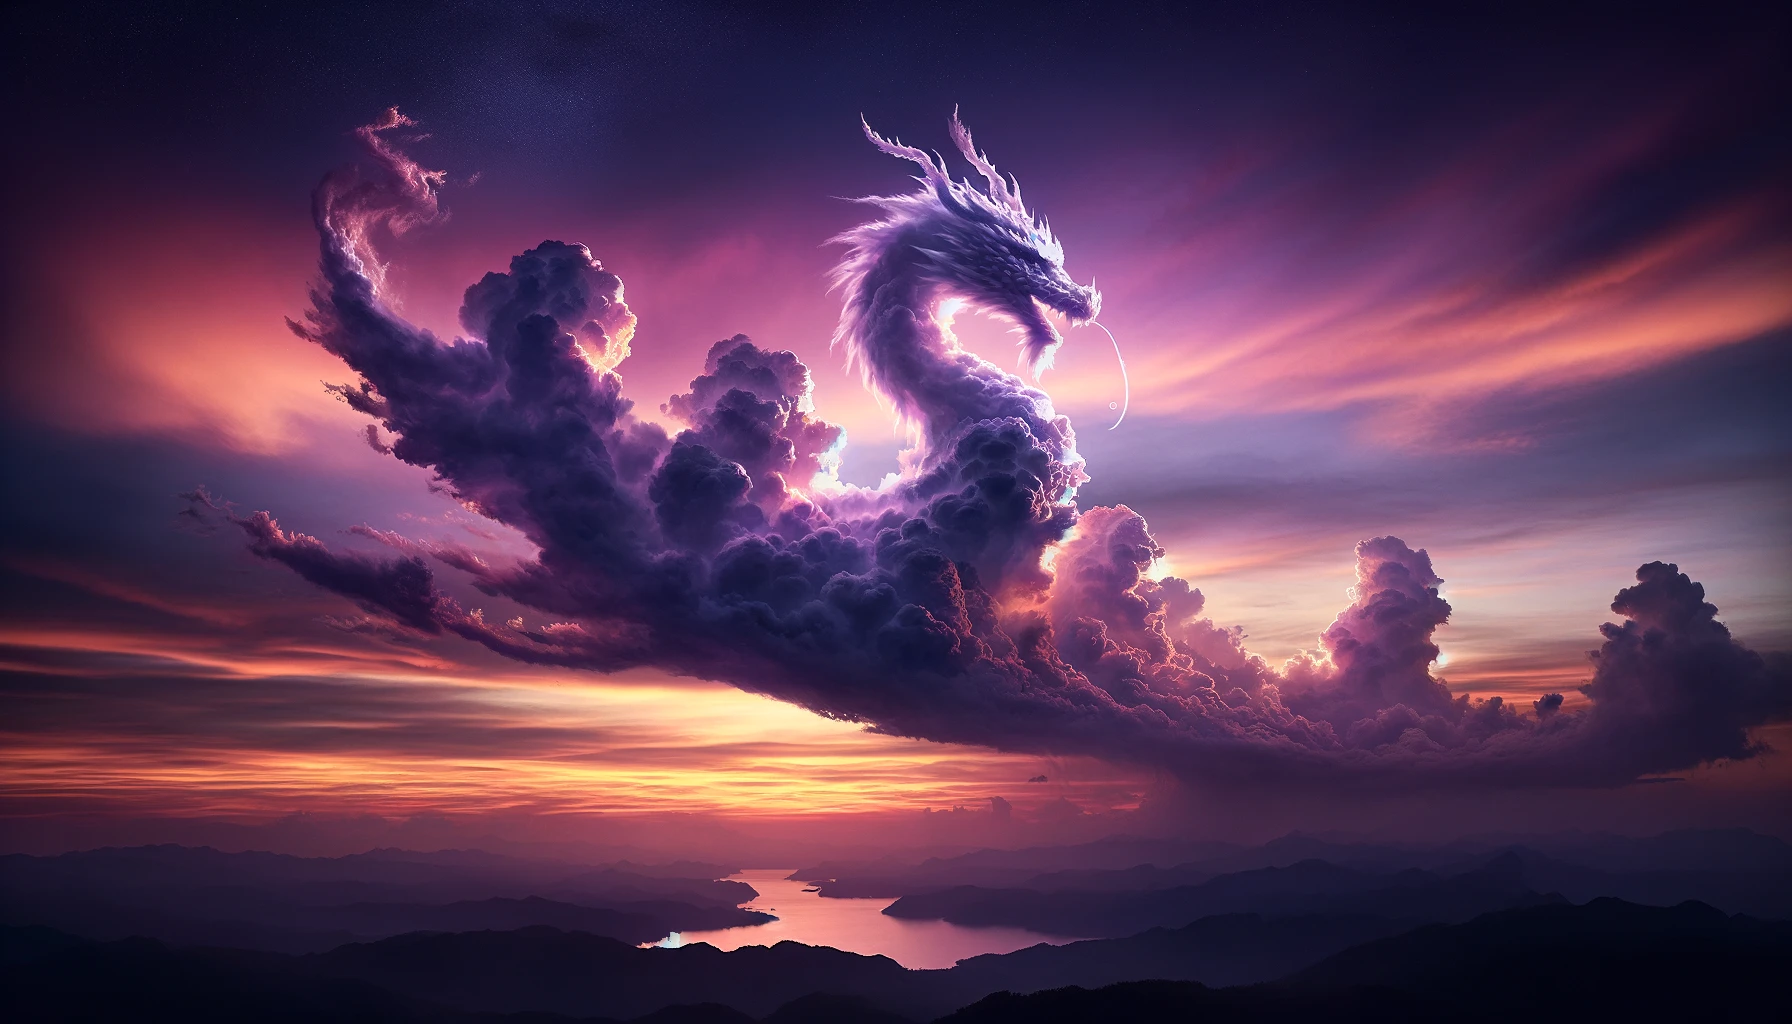 An image of a cloud in the shape of a dragon, giving off a spiritual impression. The scene is set in a serene and mystical atmosphere, with the dragon-shaped cloud majestically floating in the sky. The background is a breathtaking view of the sky at twilight, with hues of purple, orange, and pink, enhancing the mystical vibe. The cloud dragon appears almost ethereal, with its form detailed enough to discern its head, wings, and tail, suggesting a powerful yet serene presence. The overall composition evokes a sense of awe and spiritual wonder, as if the viewer has caught a glimpse of a mythical creature on a rare occasion.